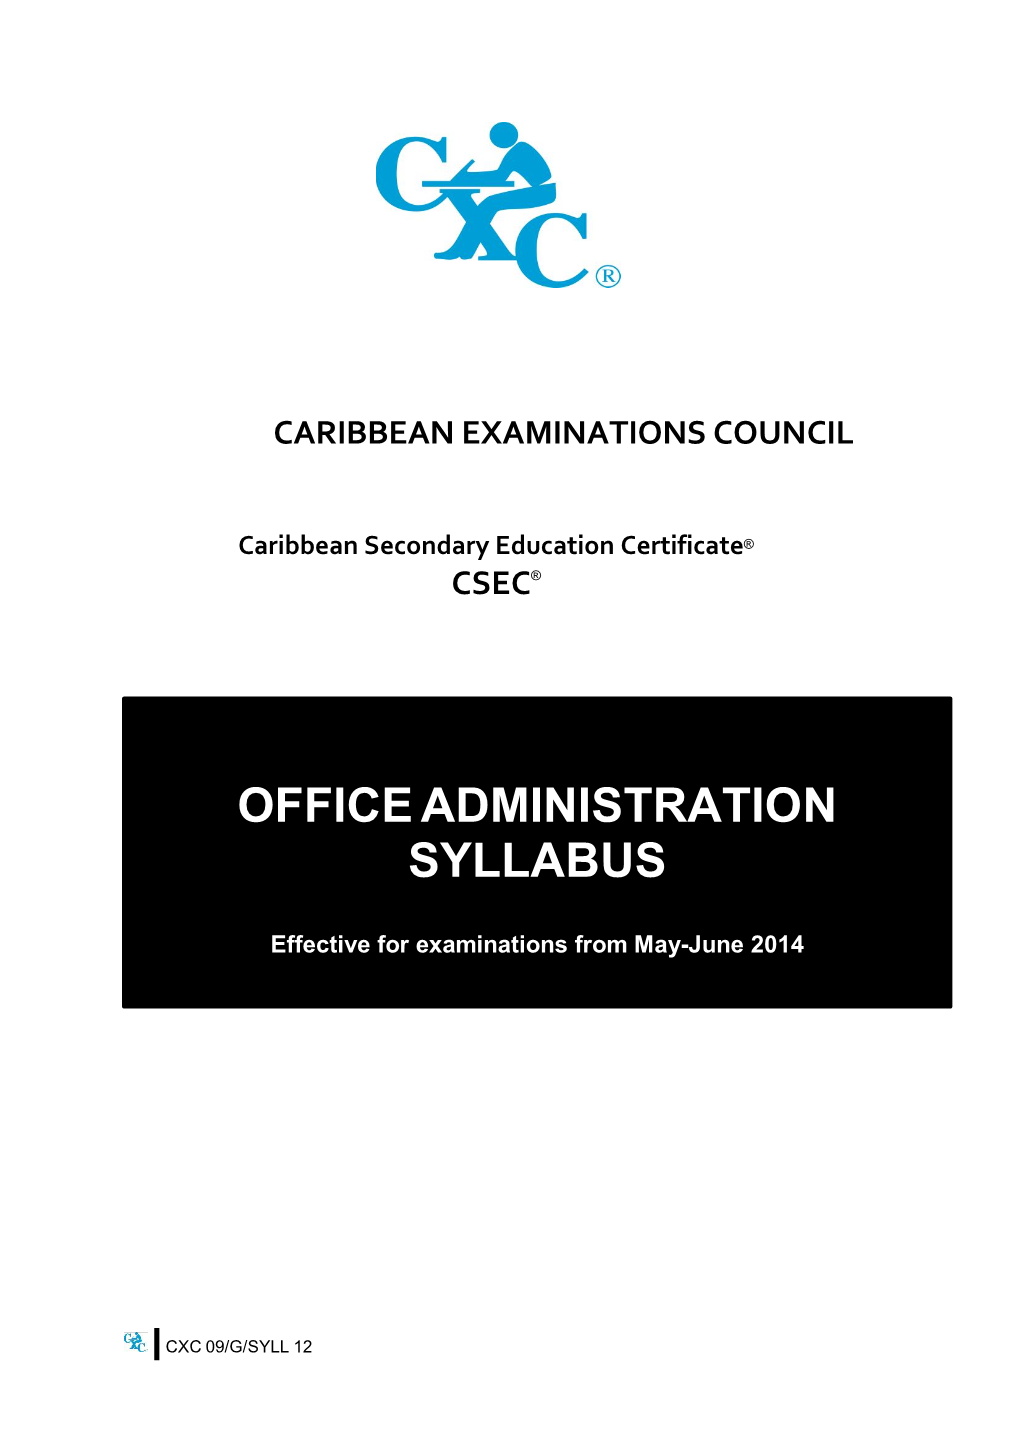 Office Administration Syllabus